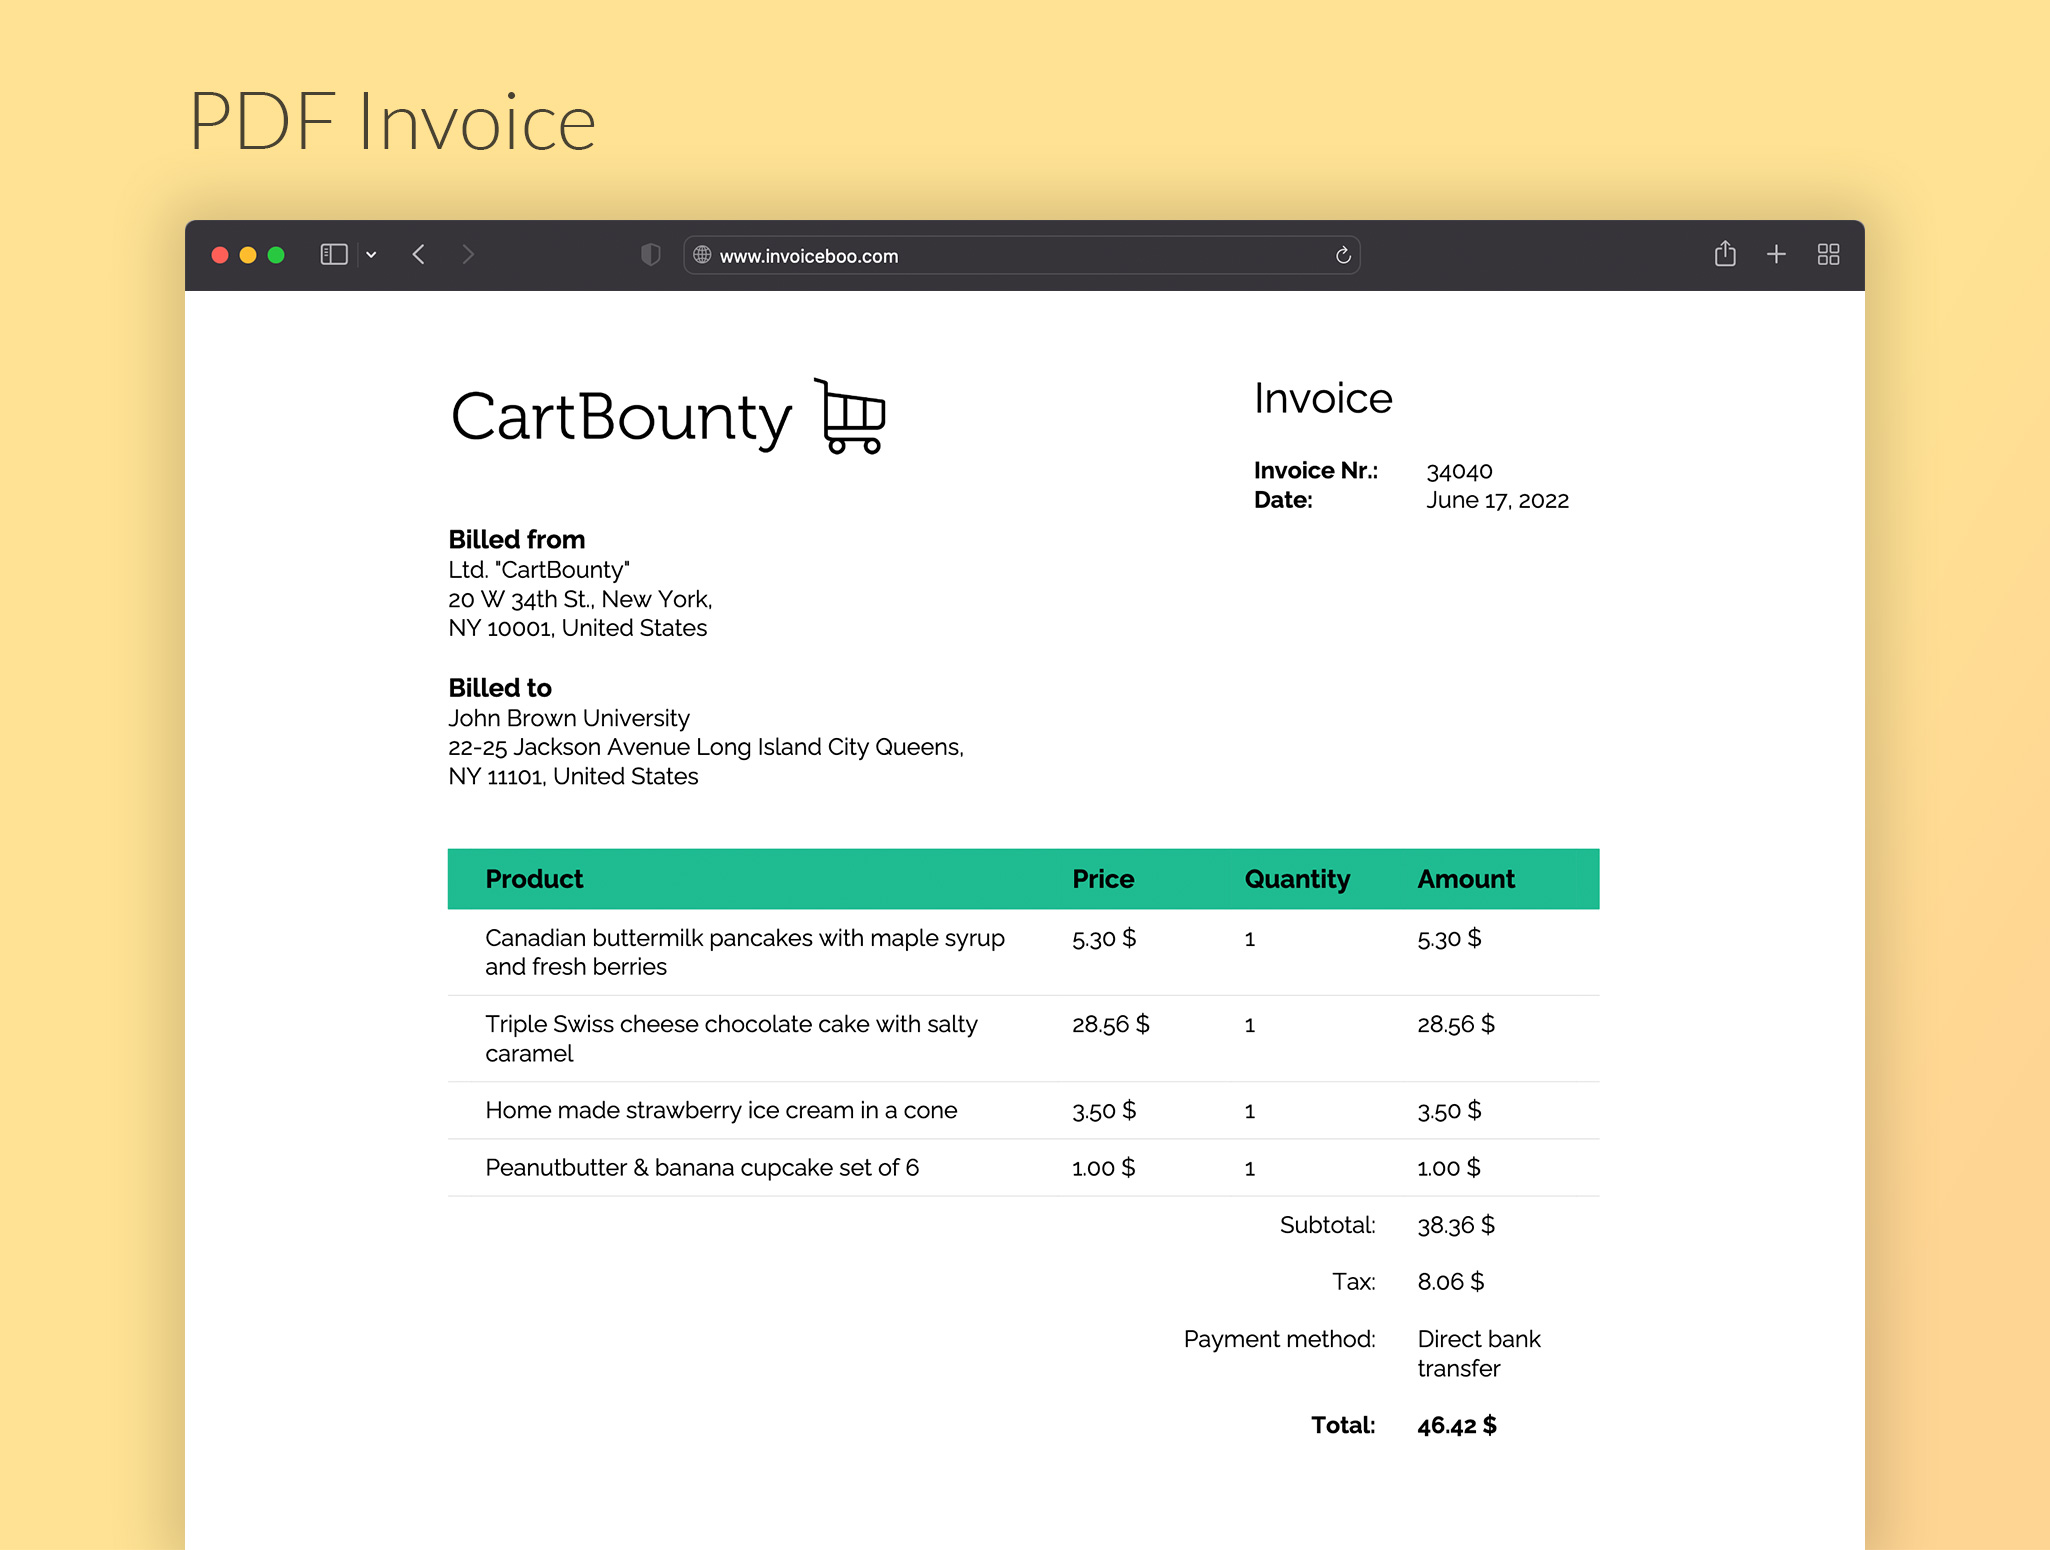 Downloaded PDF Invoice example